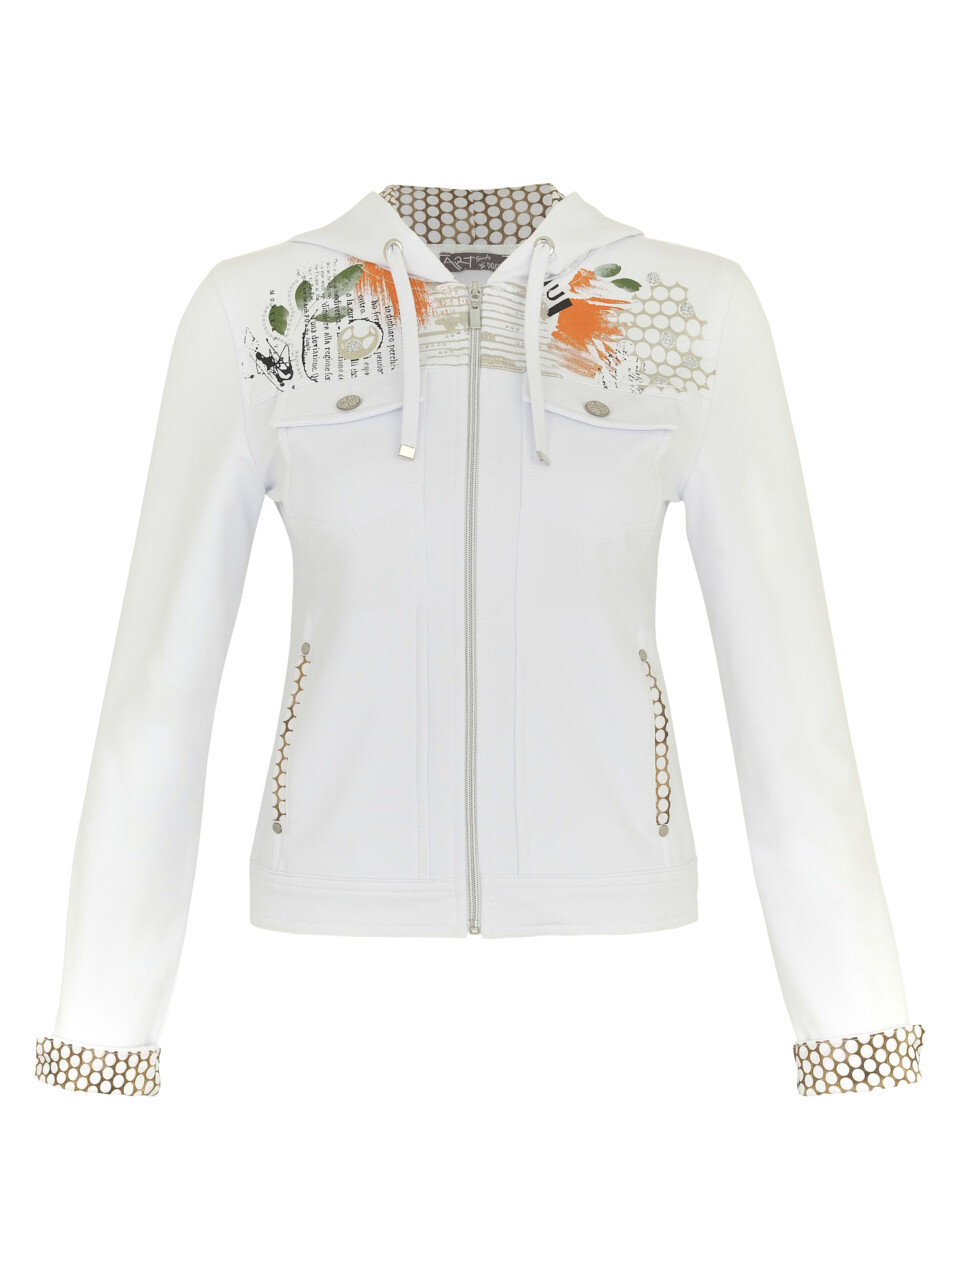 Simply Art Dolcezza: Big Changes Wearable Art Jacket Hoodie